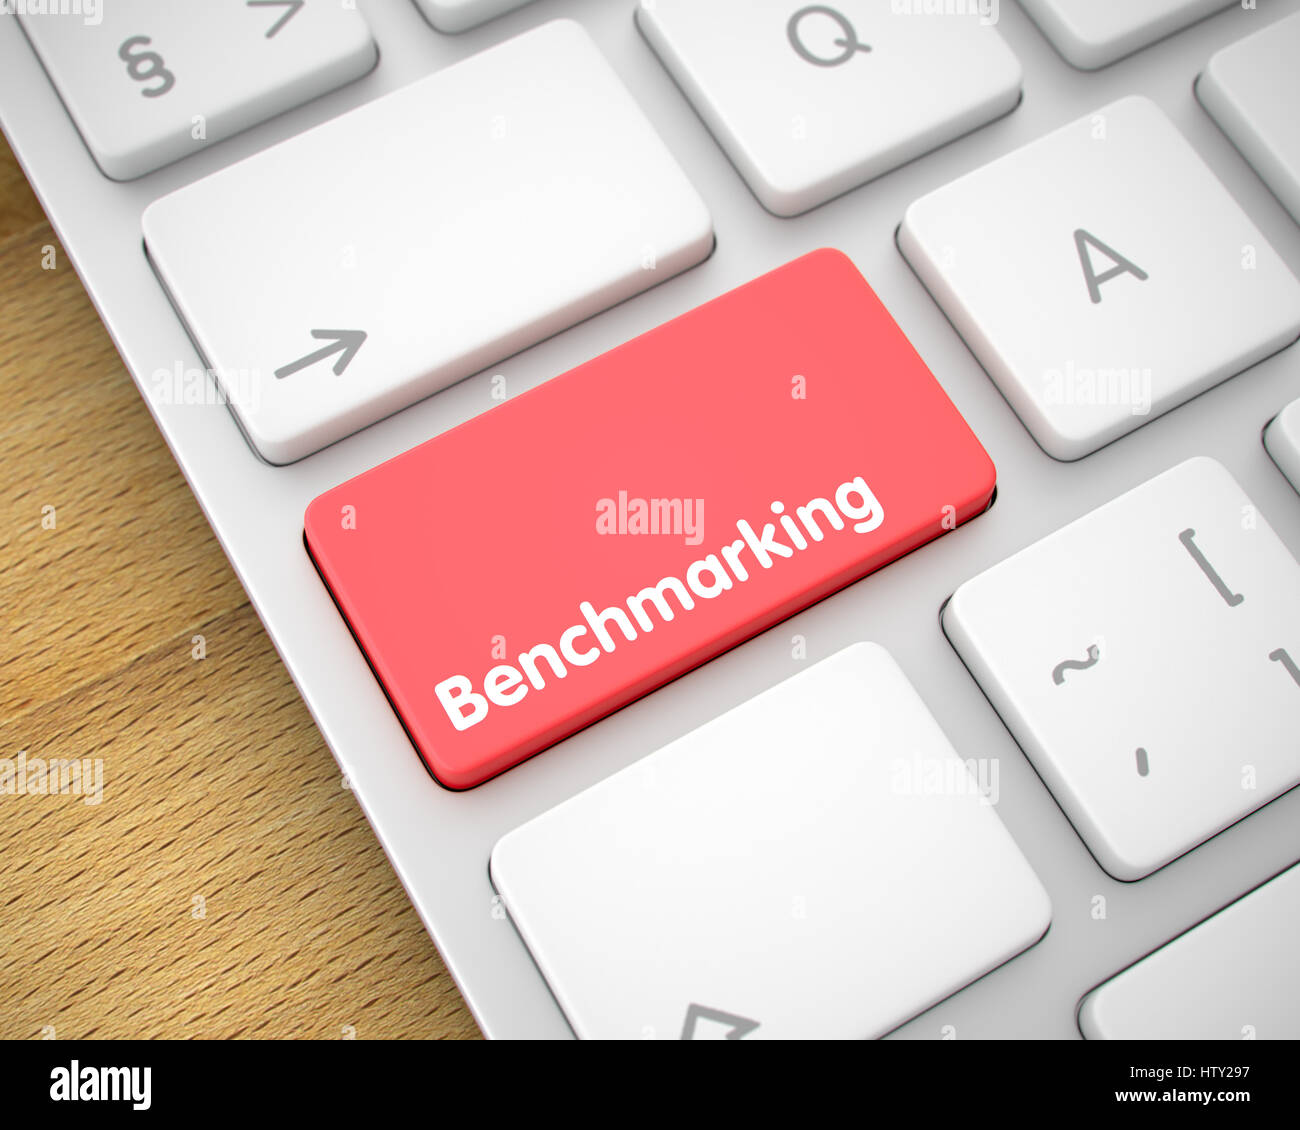 Benchmarking - Inscription on the Red Keyboard Keypad. 3D. Stock Photo